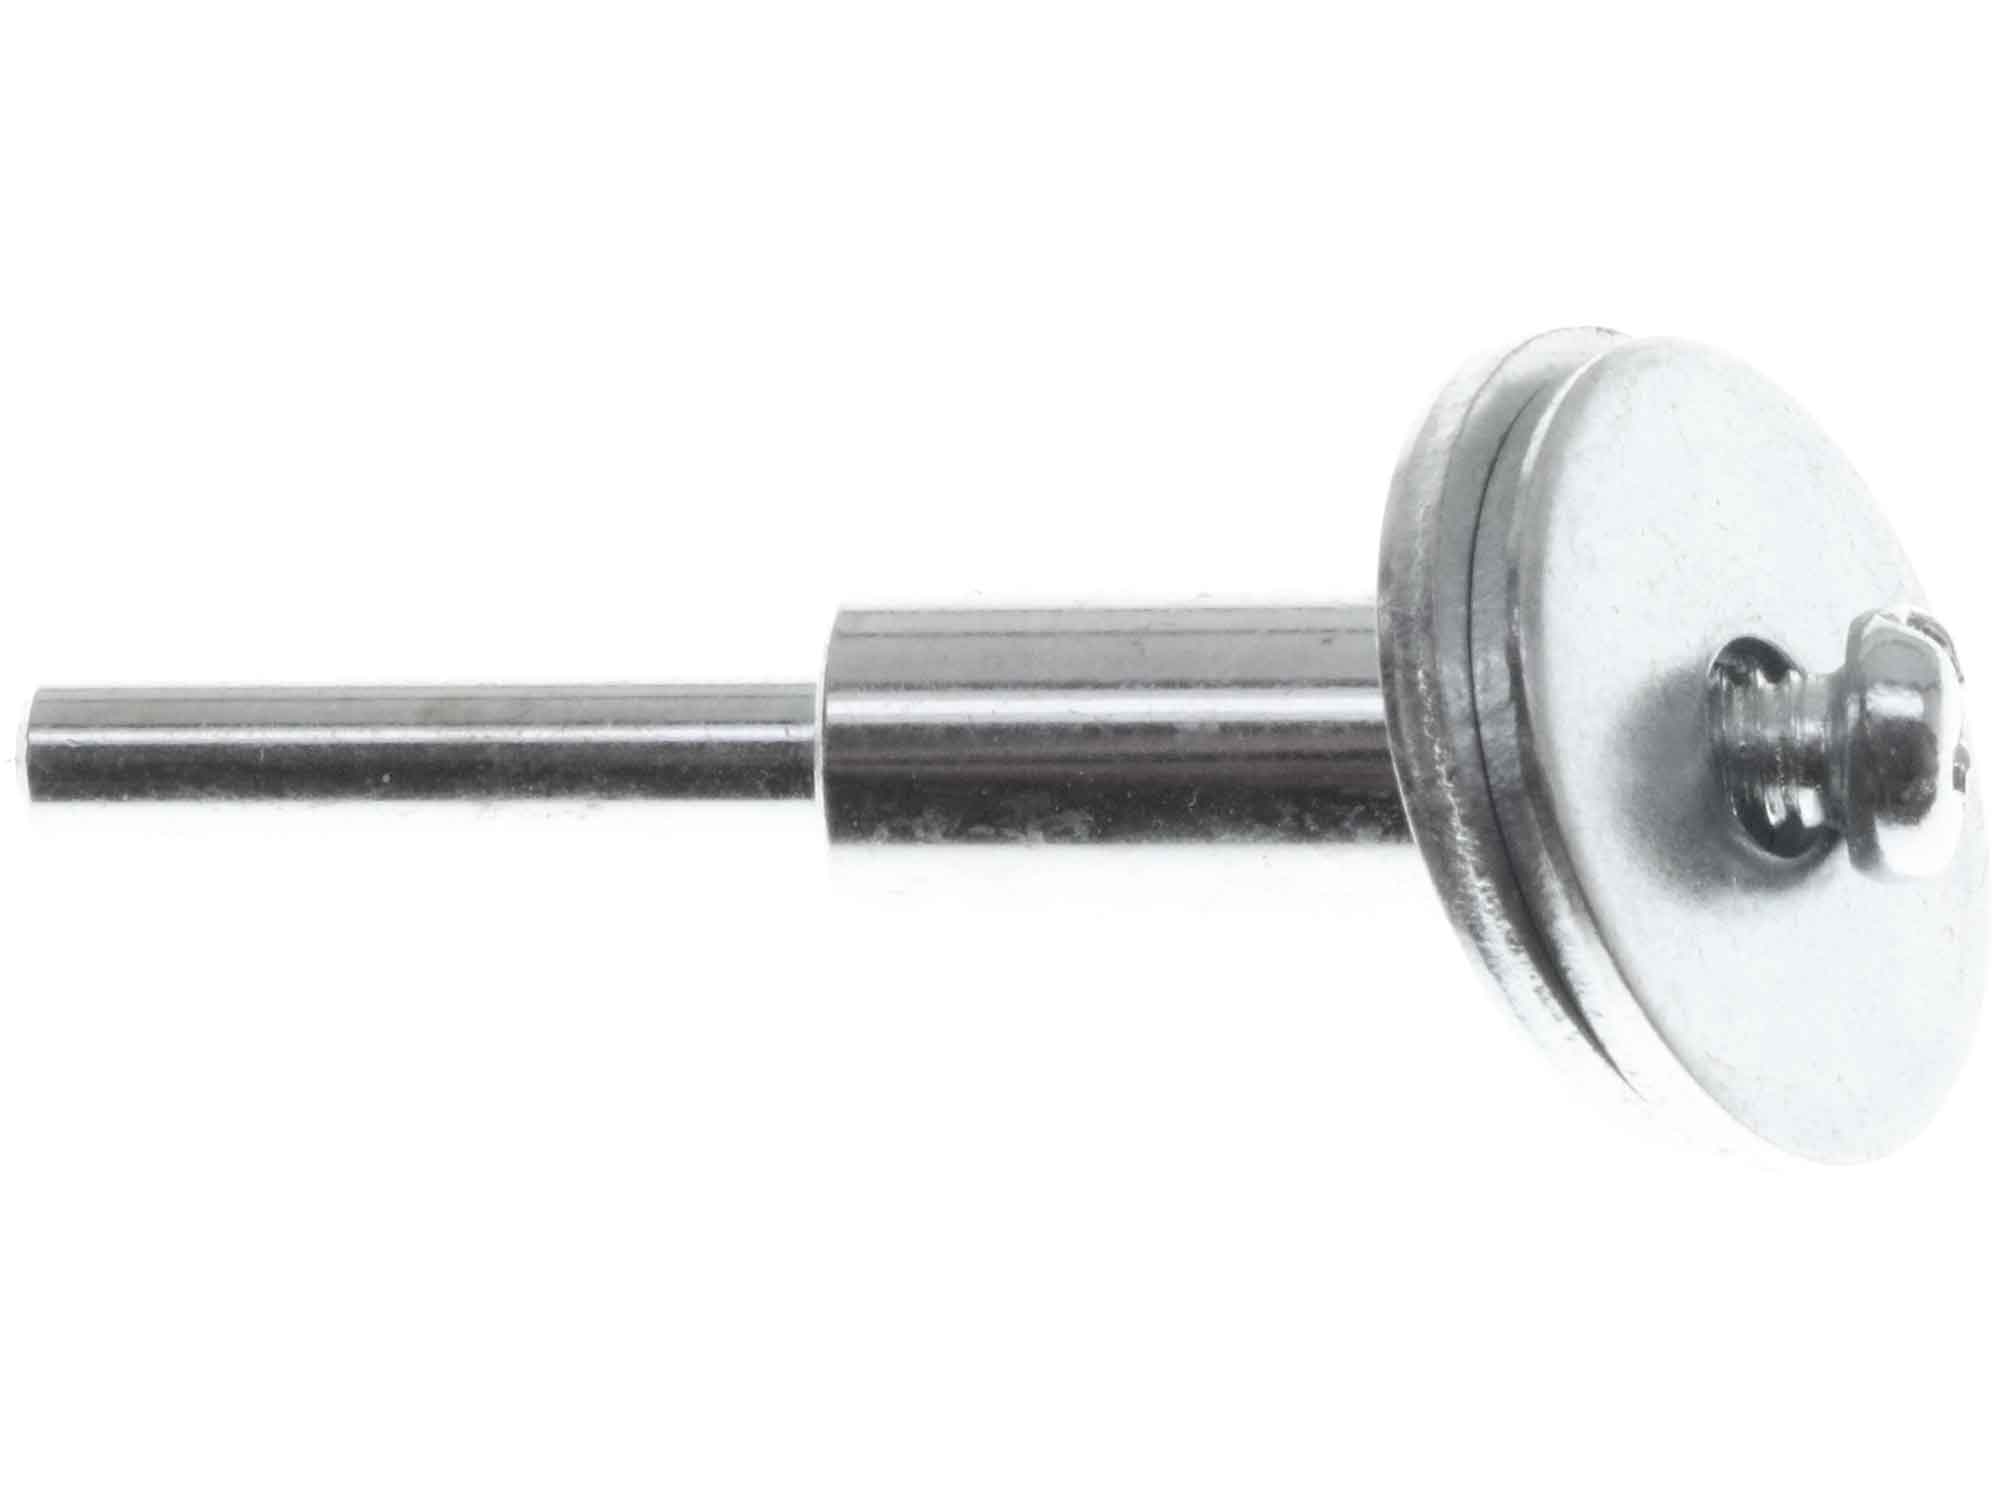 03.2mm - 1/8 inch Long Screw Mandrel with Washers - 1/8 inch shank